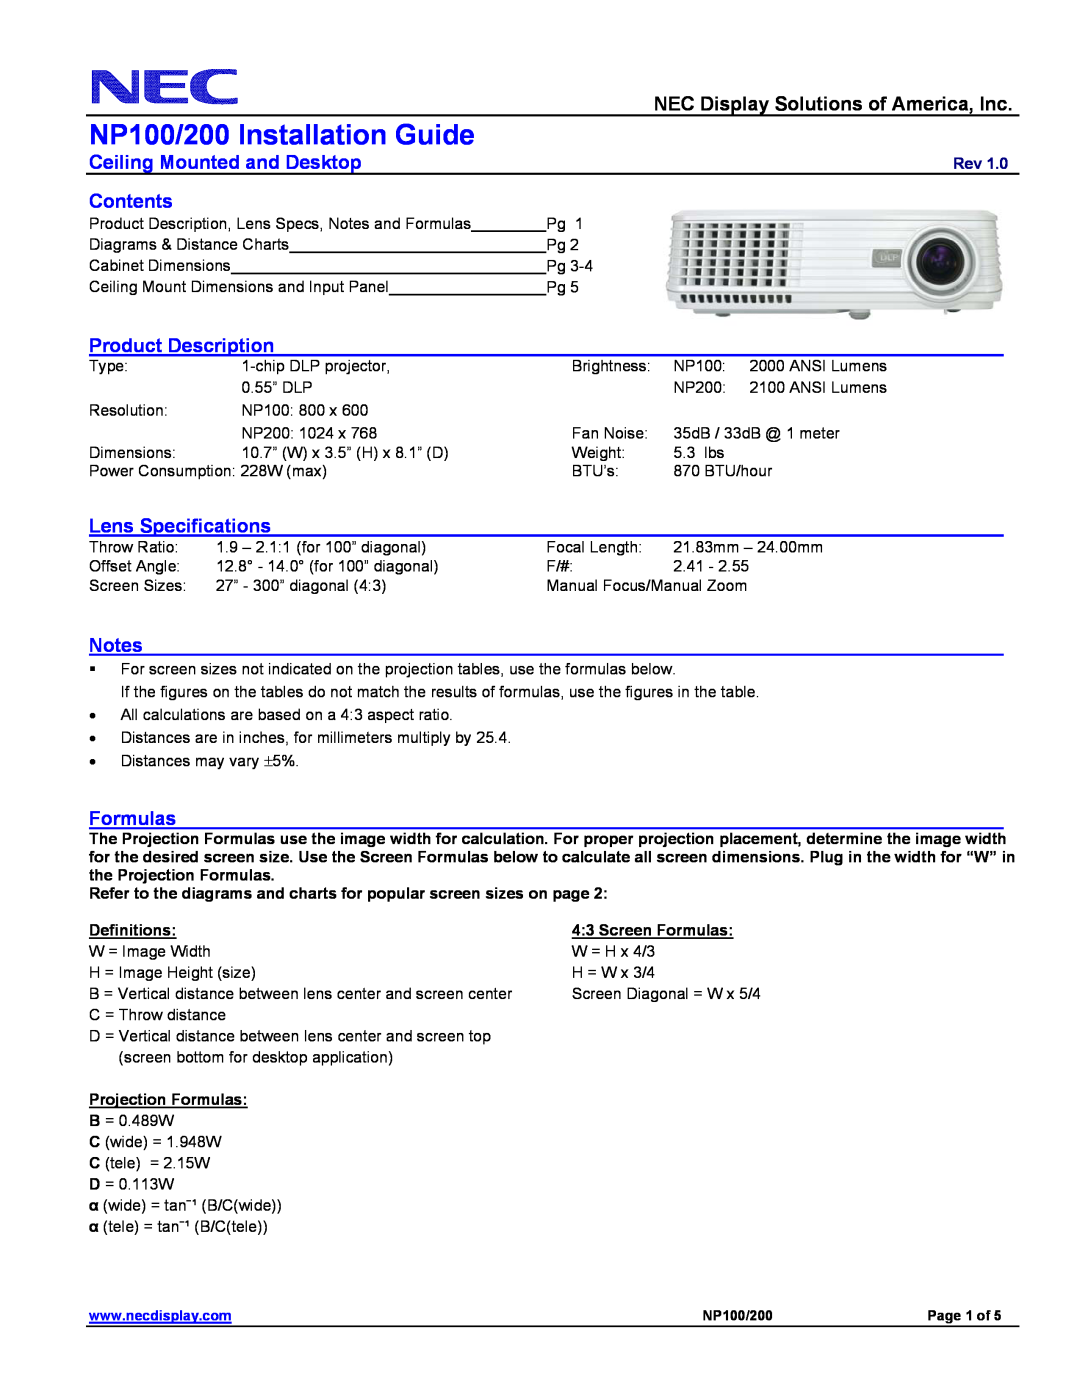 NEC specifications NP100/200 Installation Guide, NEC Display Solutions of America, Inc, Ceiling Mounted and Desktop 